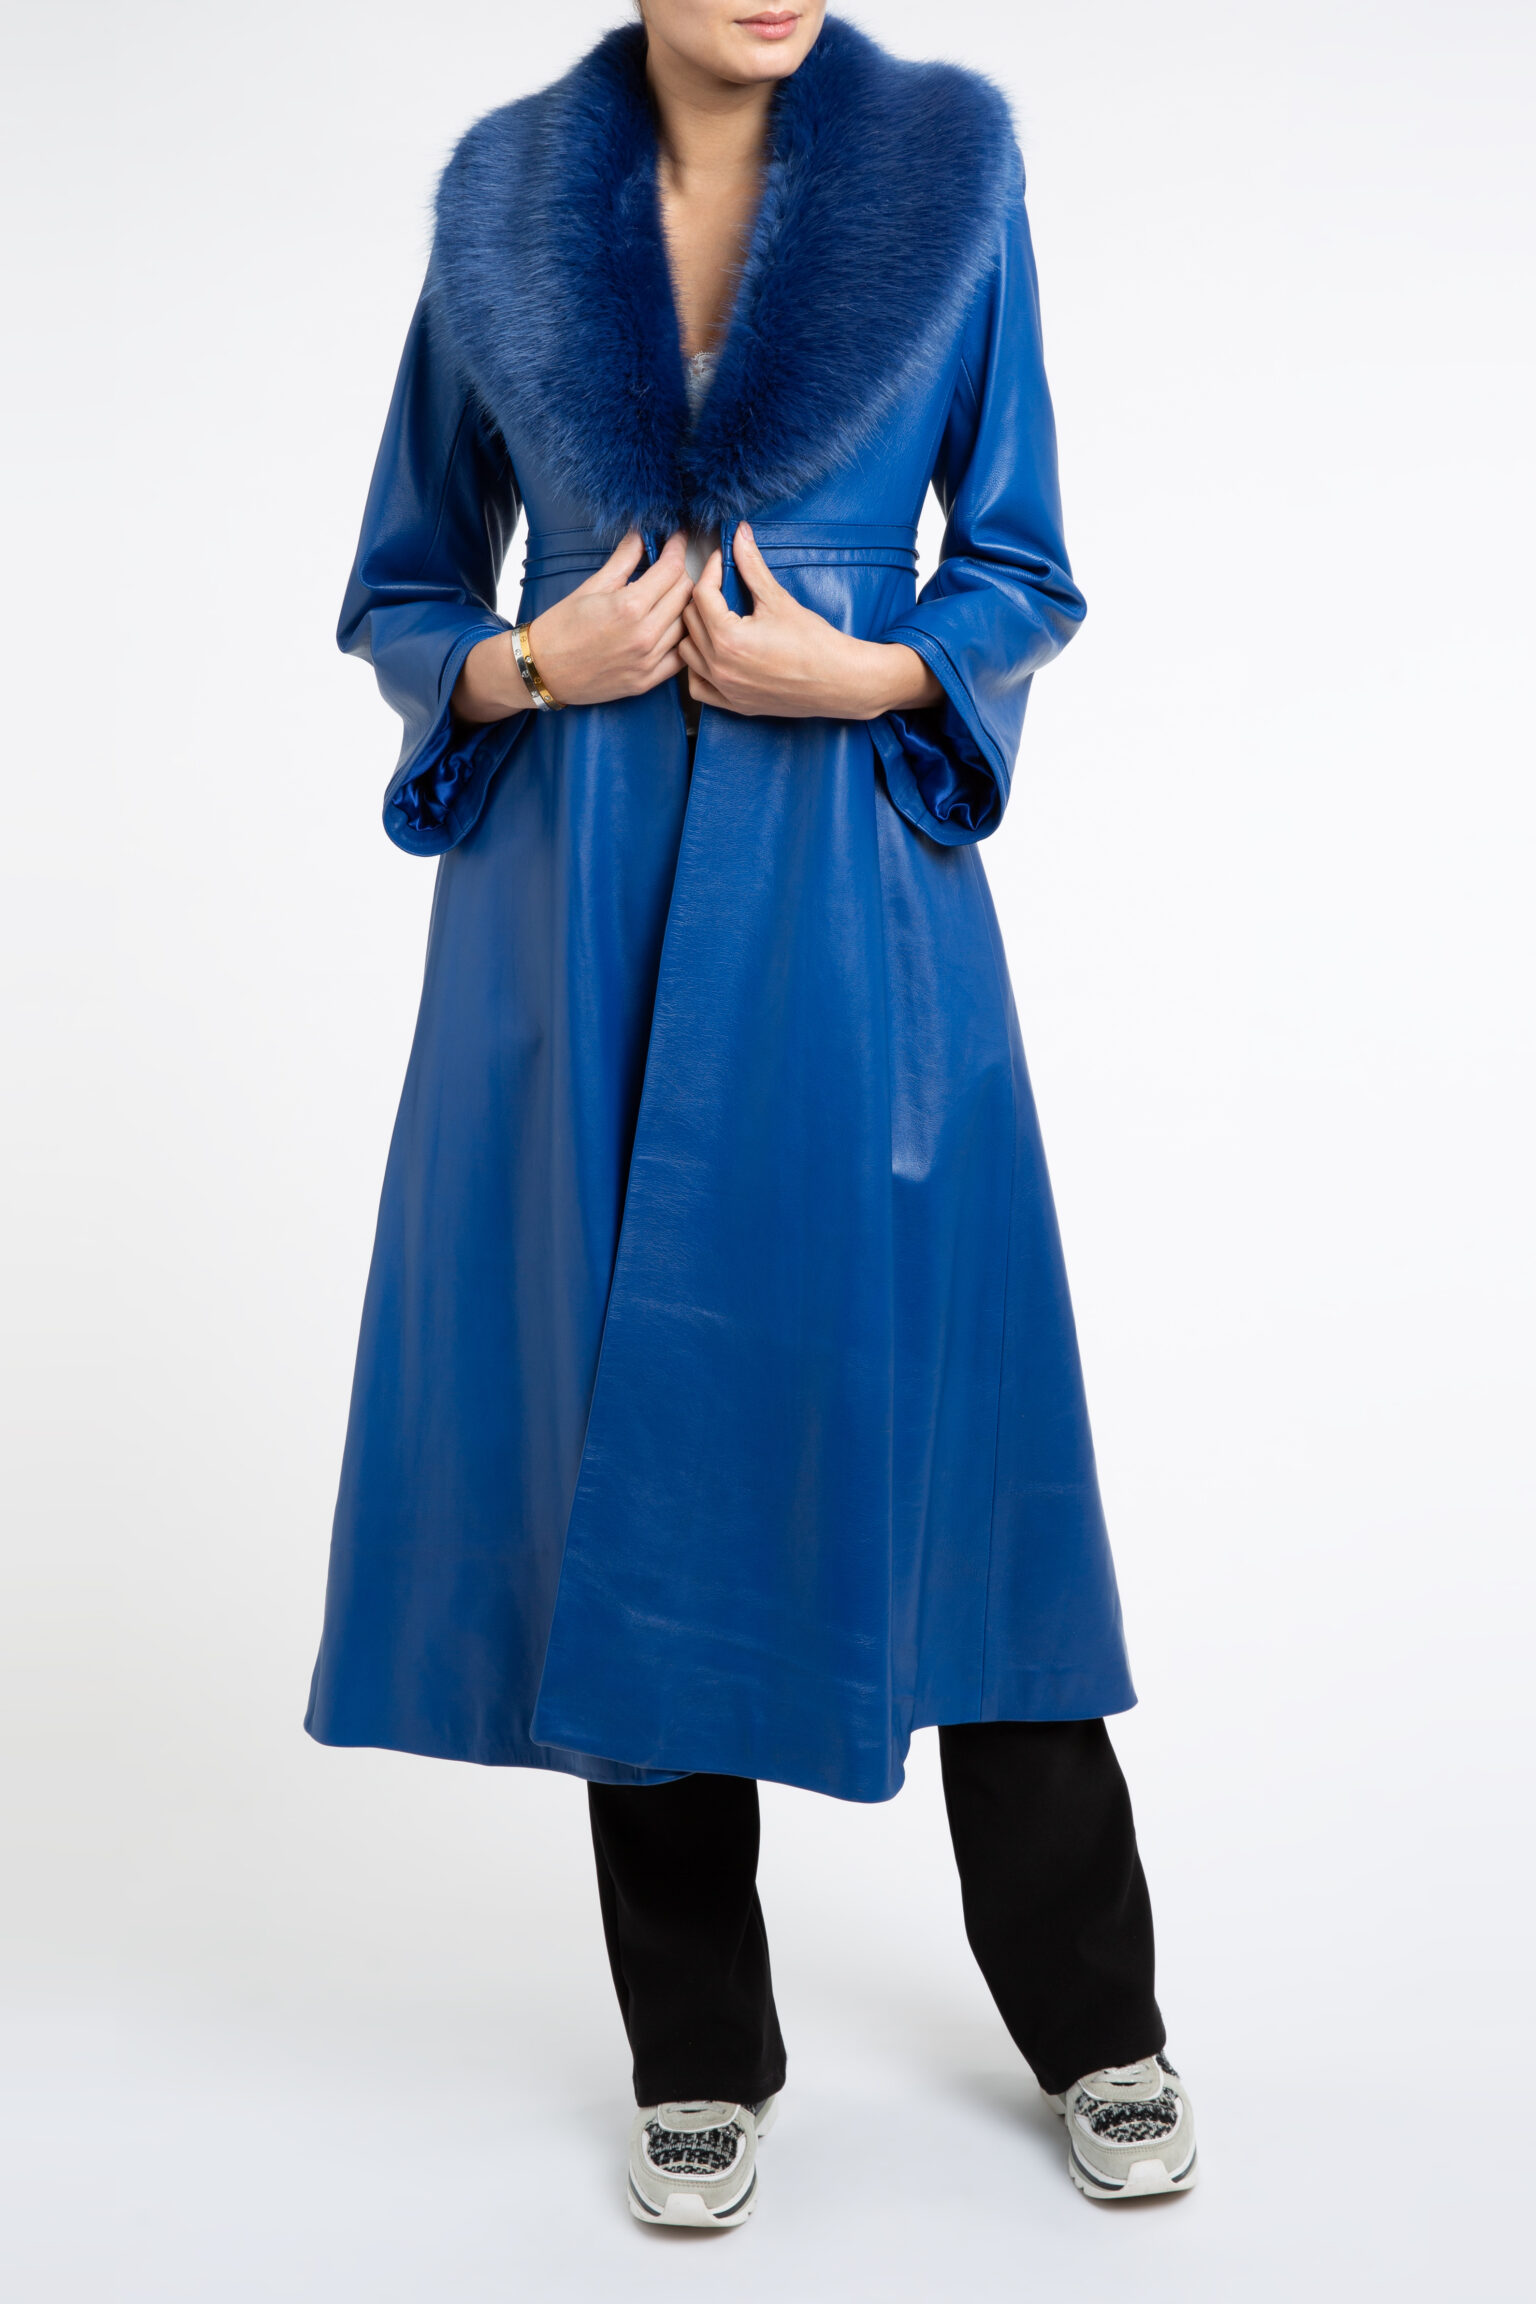 Edward Leather Trench Coat in Blue - SOLD OUT